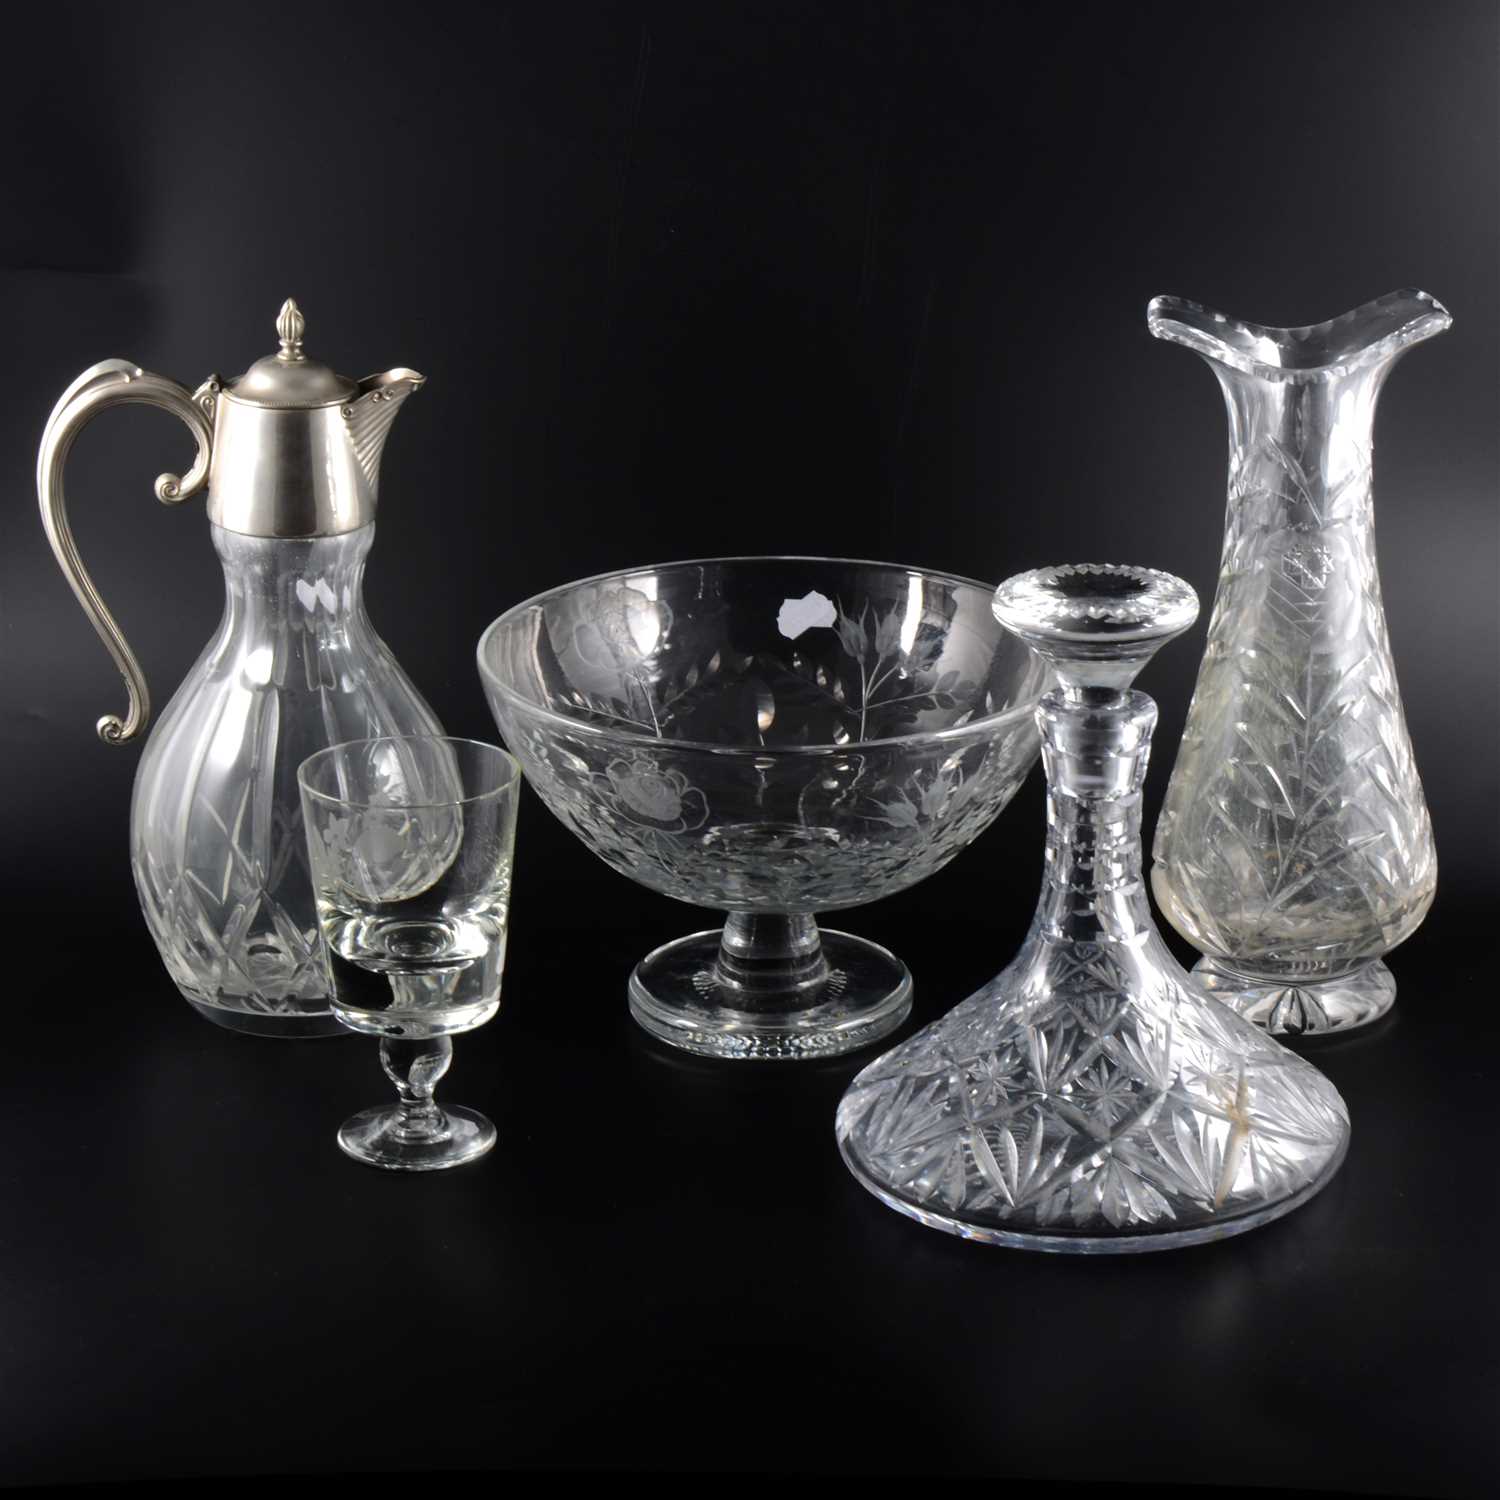 Lot 12 - A quantity of modern crystal glassware including decanters and a centre bowl.